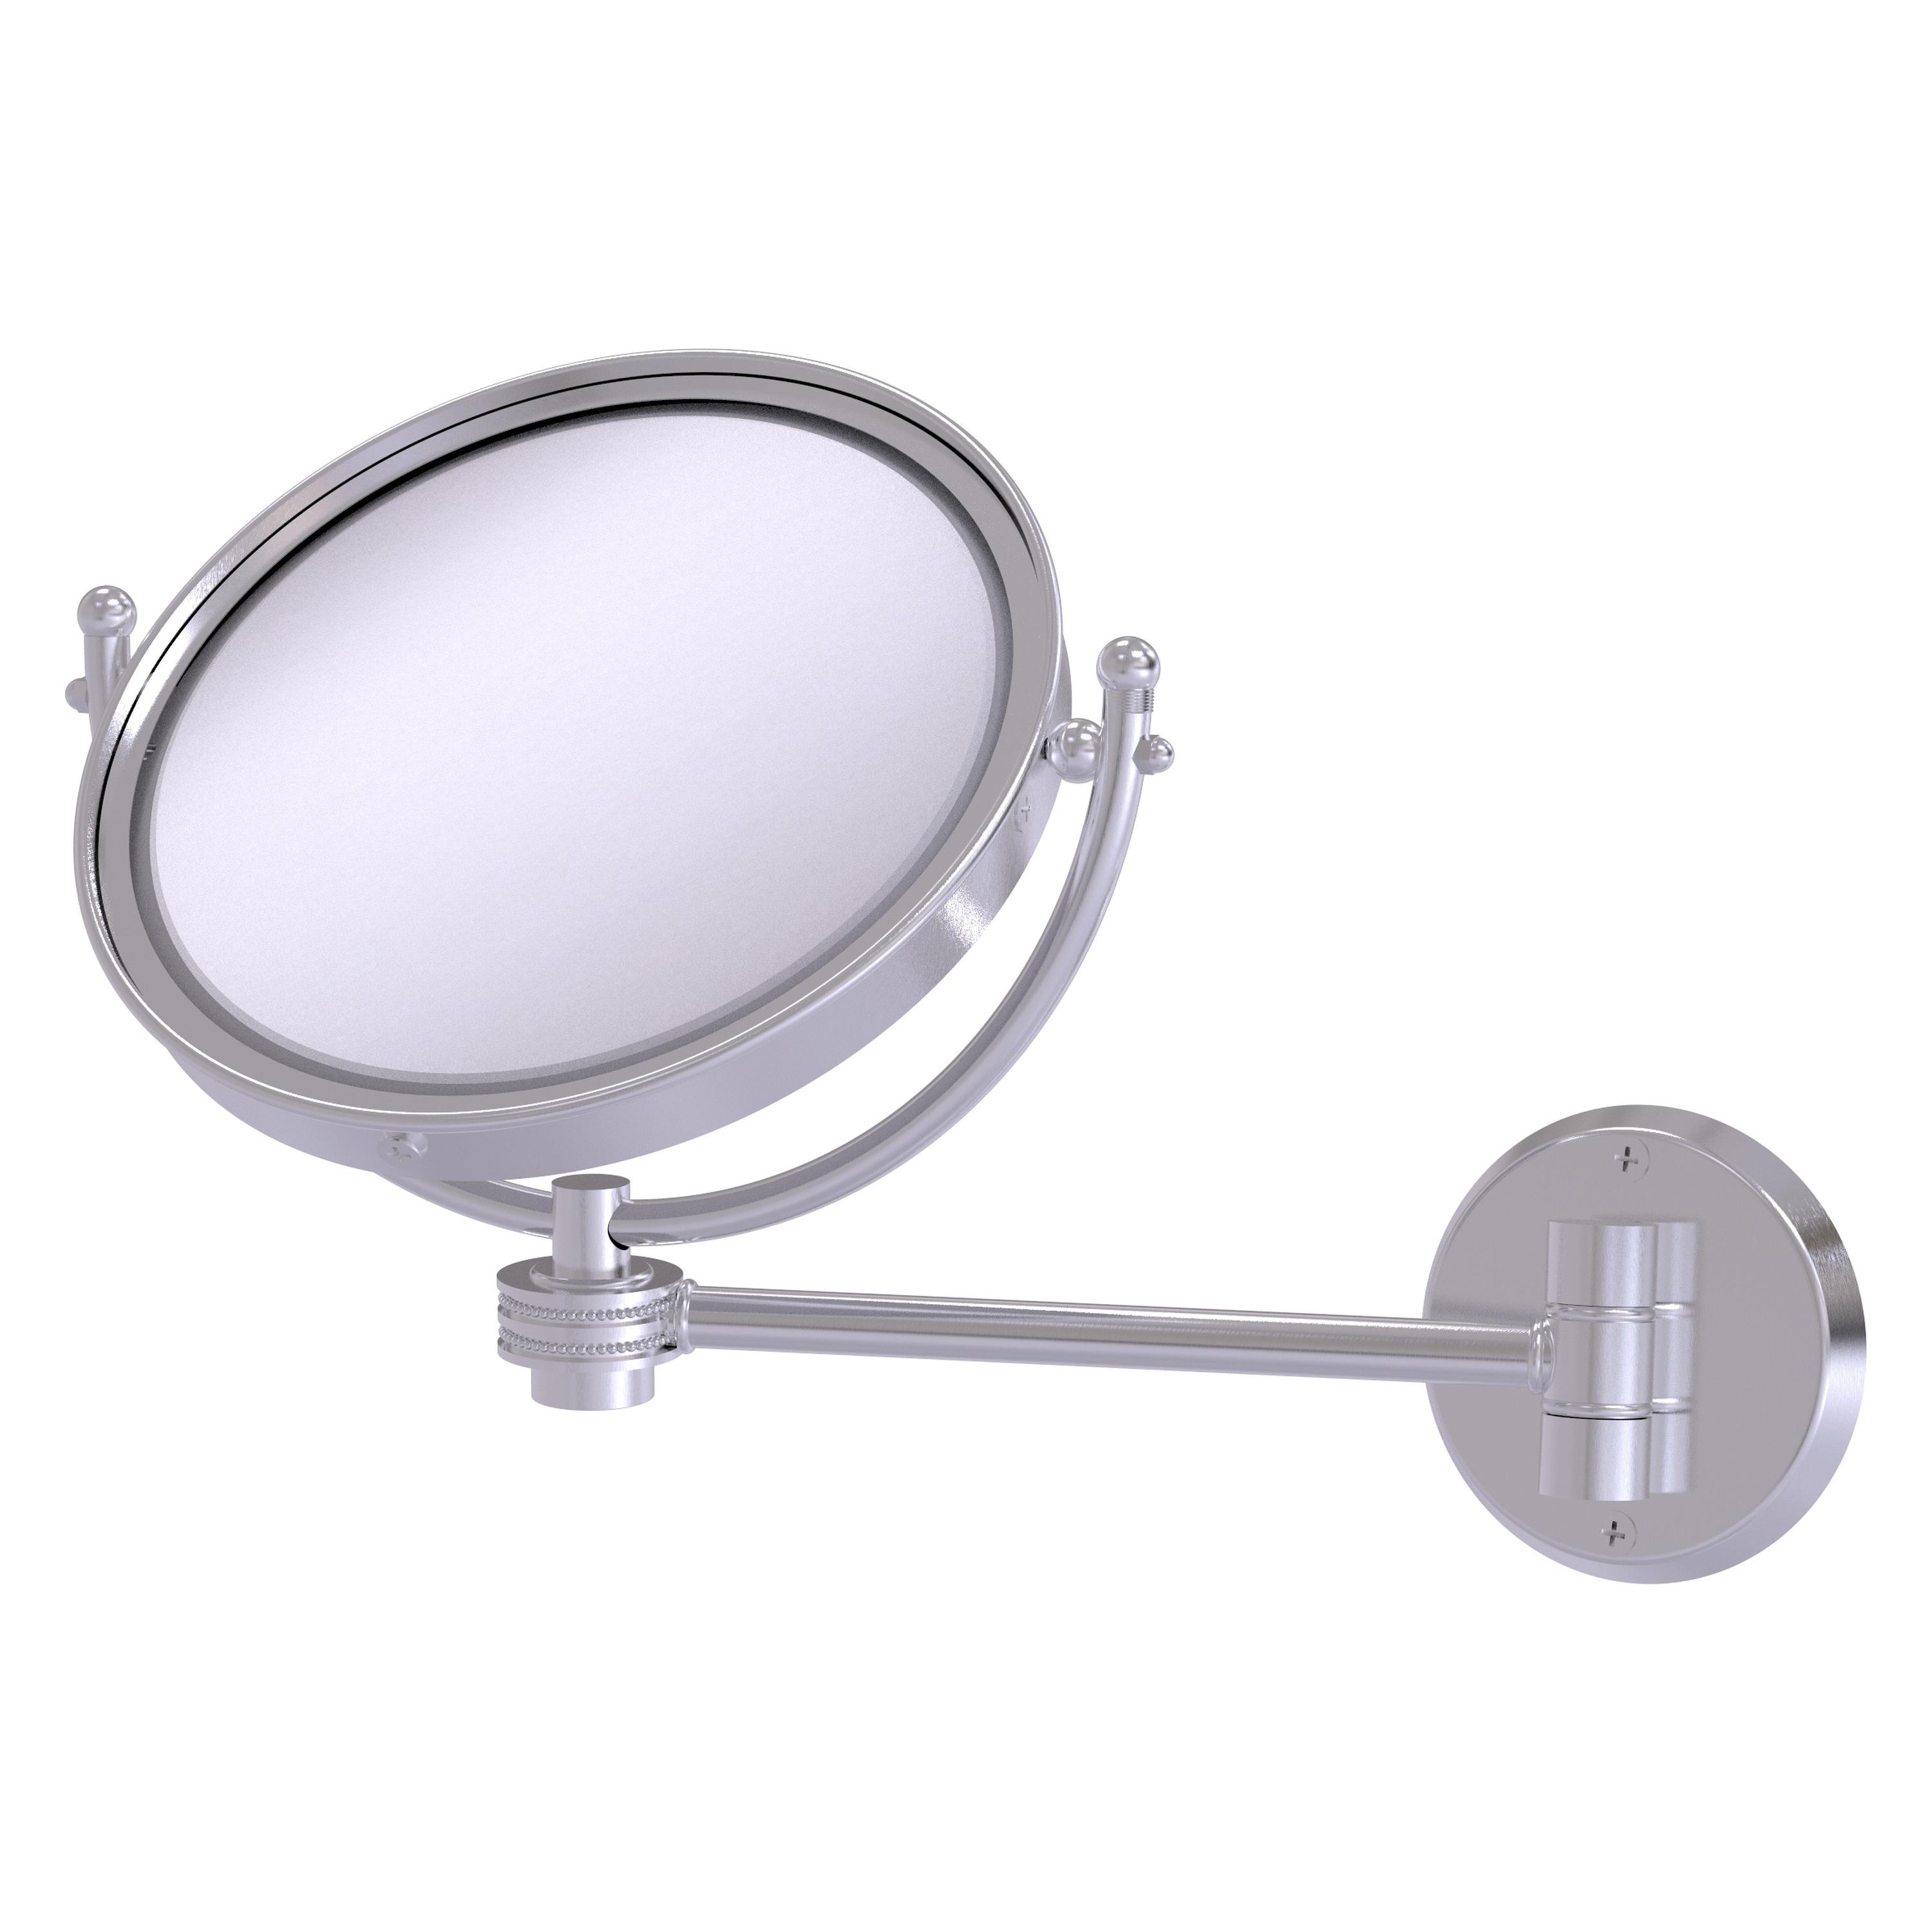 8-in x 10-in Satin Chrome Double-sided 5X Magnifying Wall-mounted Vanity Mirror | - Allied Brass WM-5D/5X-SCH